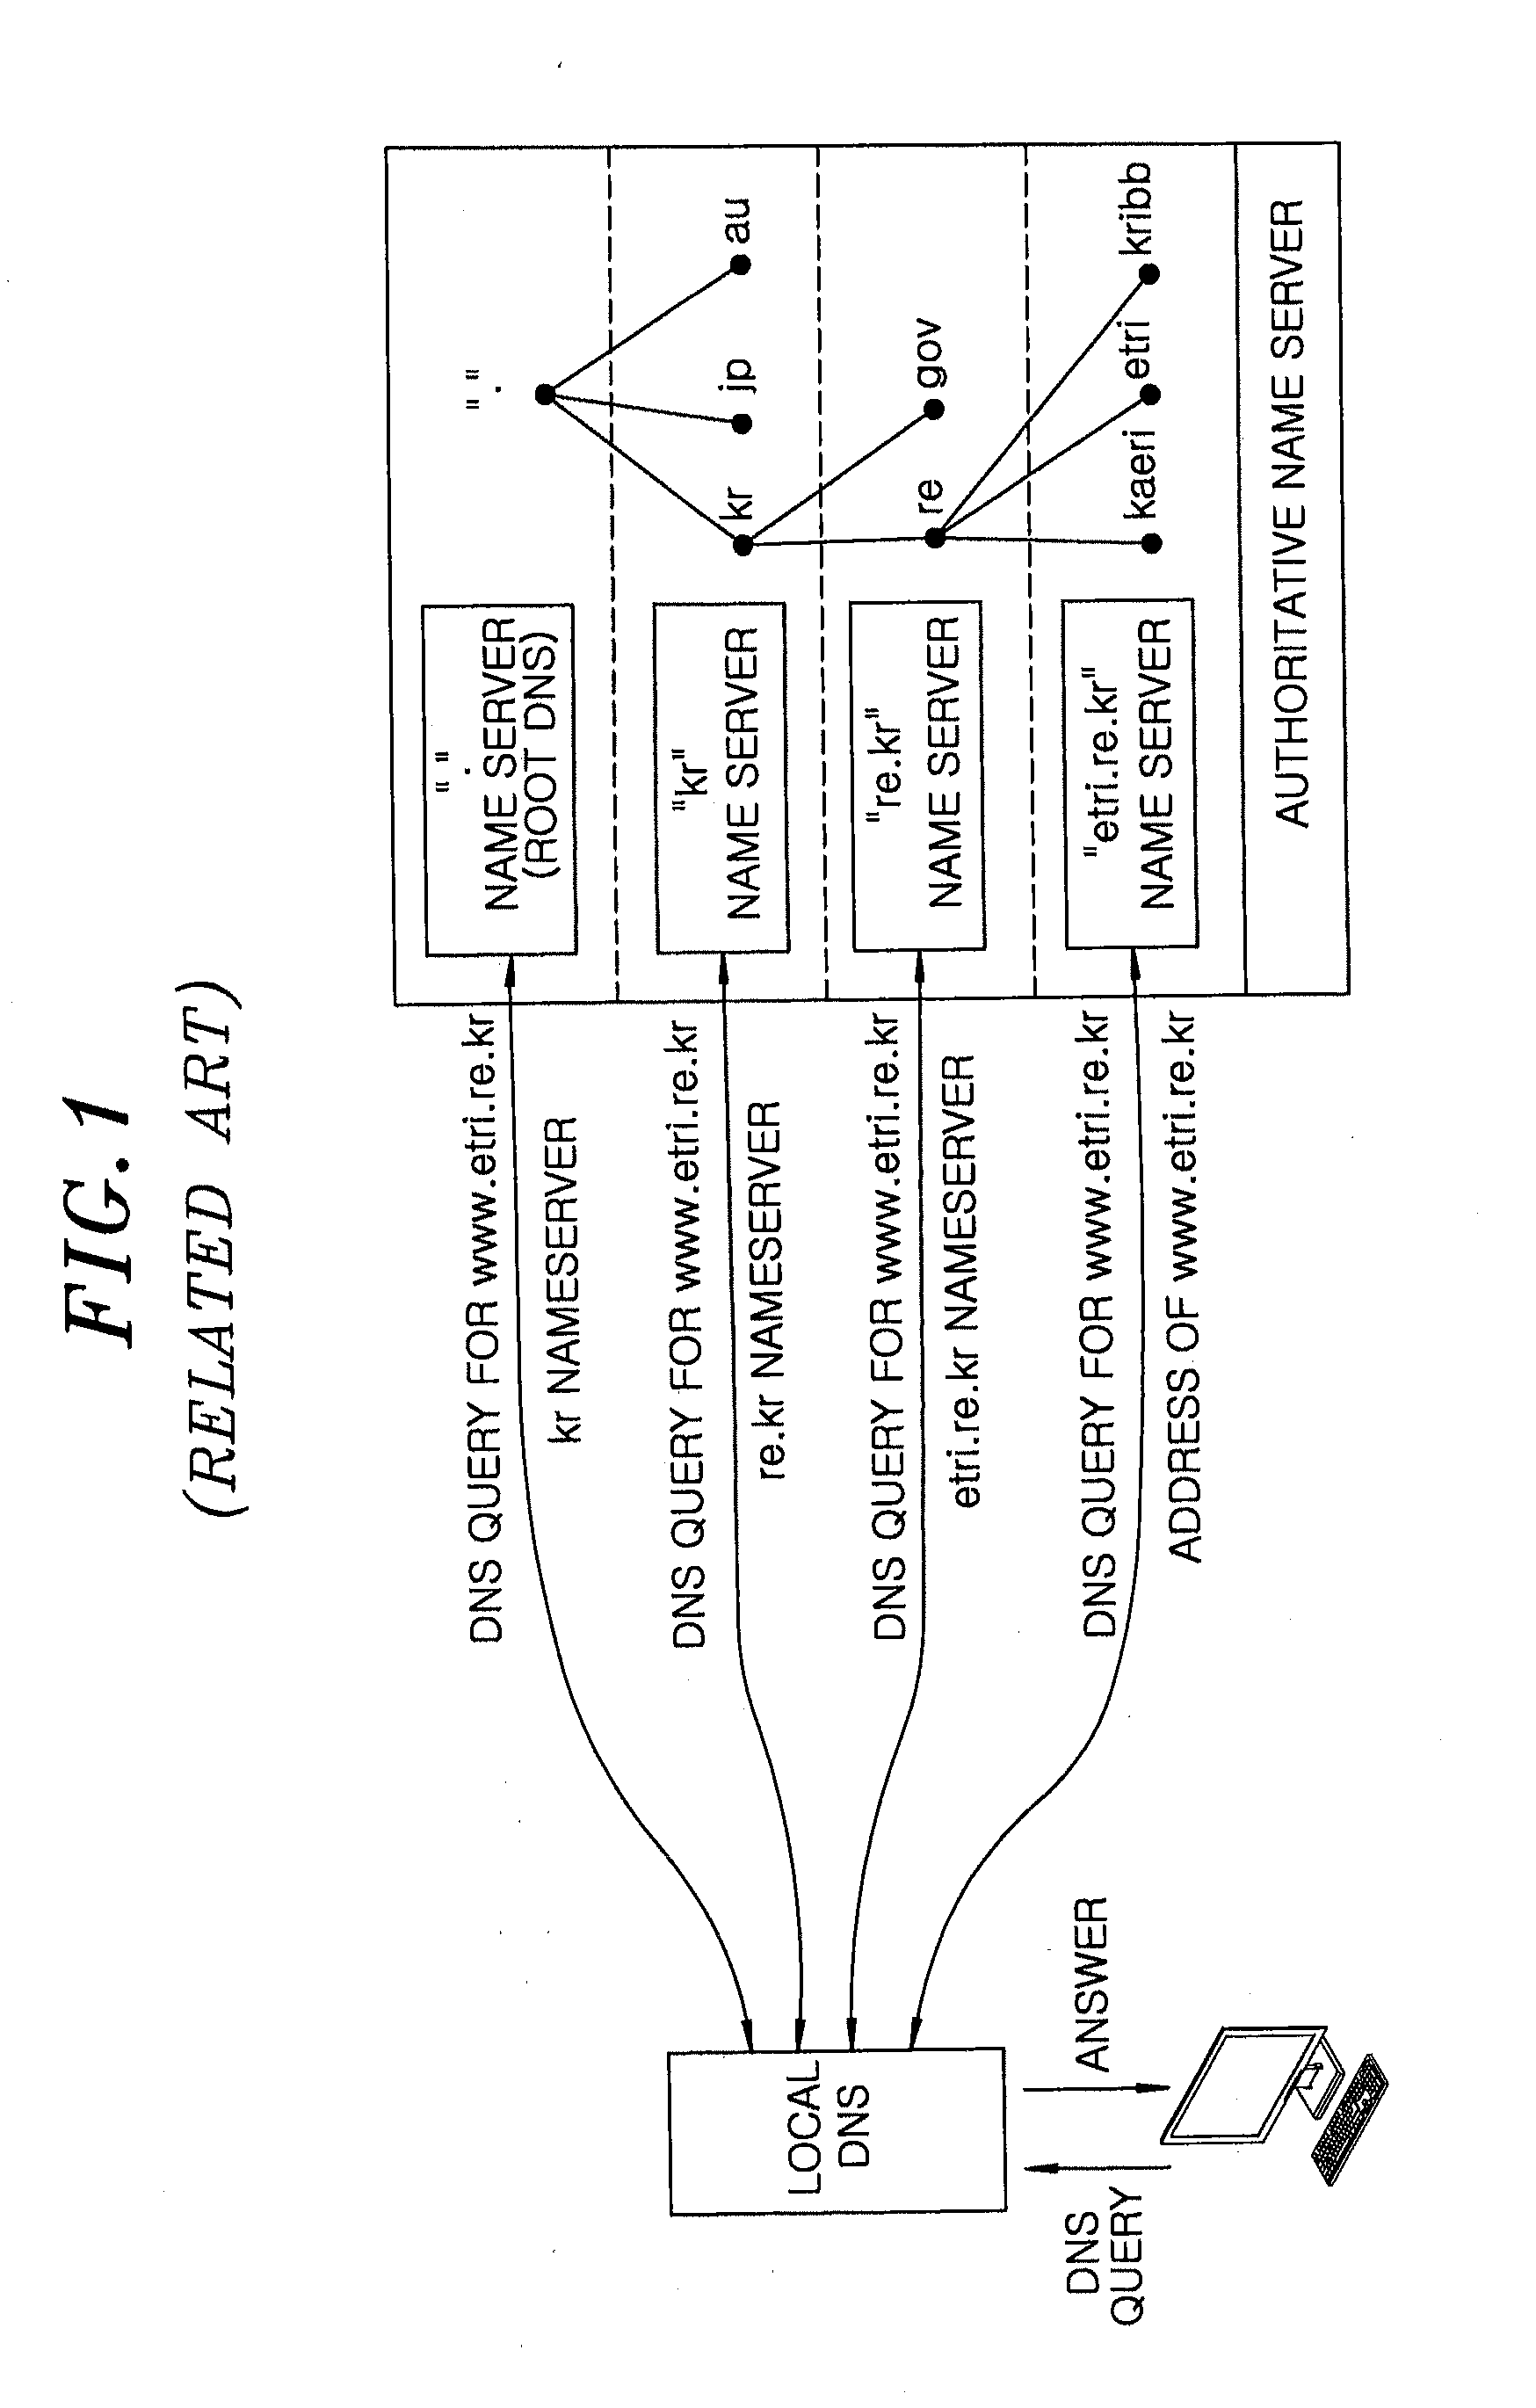 Method and apparatus for monitoring and processing DNS query traffic